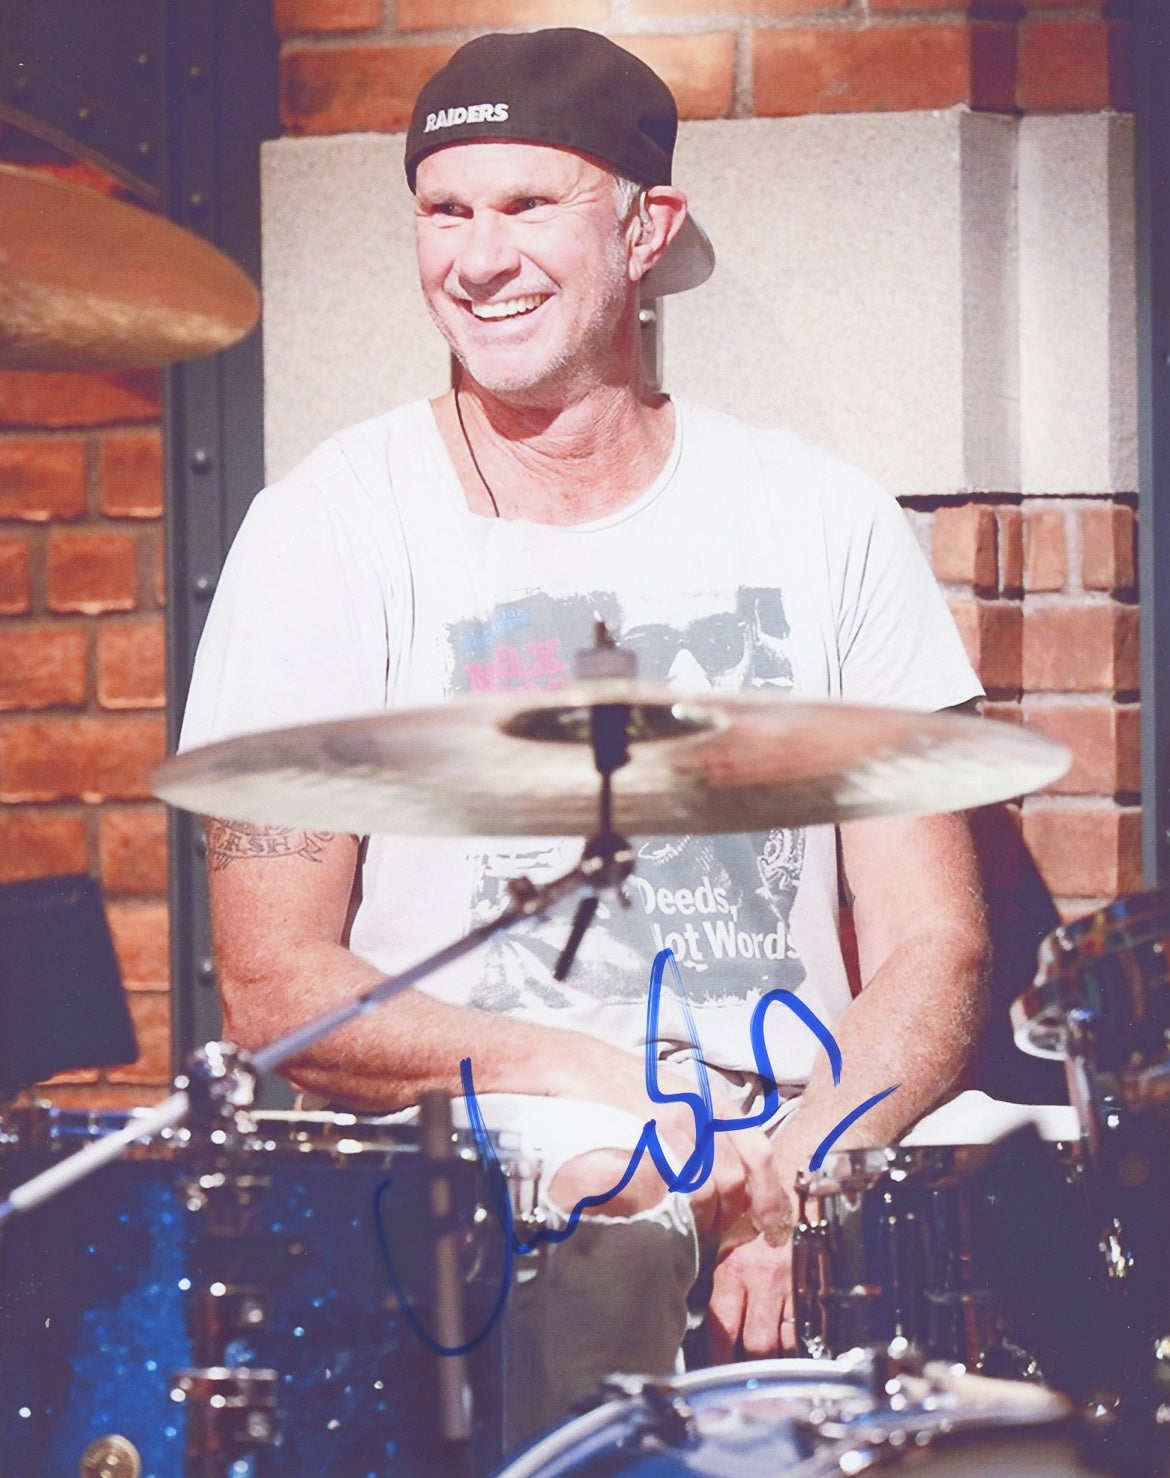 Chad Smith Signed 8x10 Photo